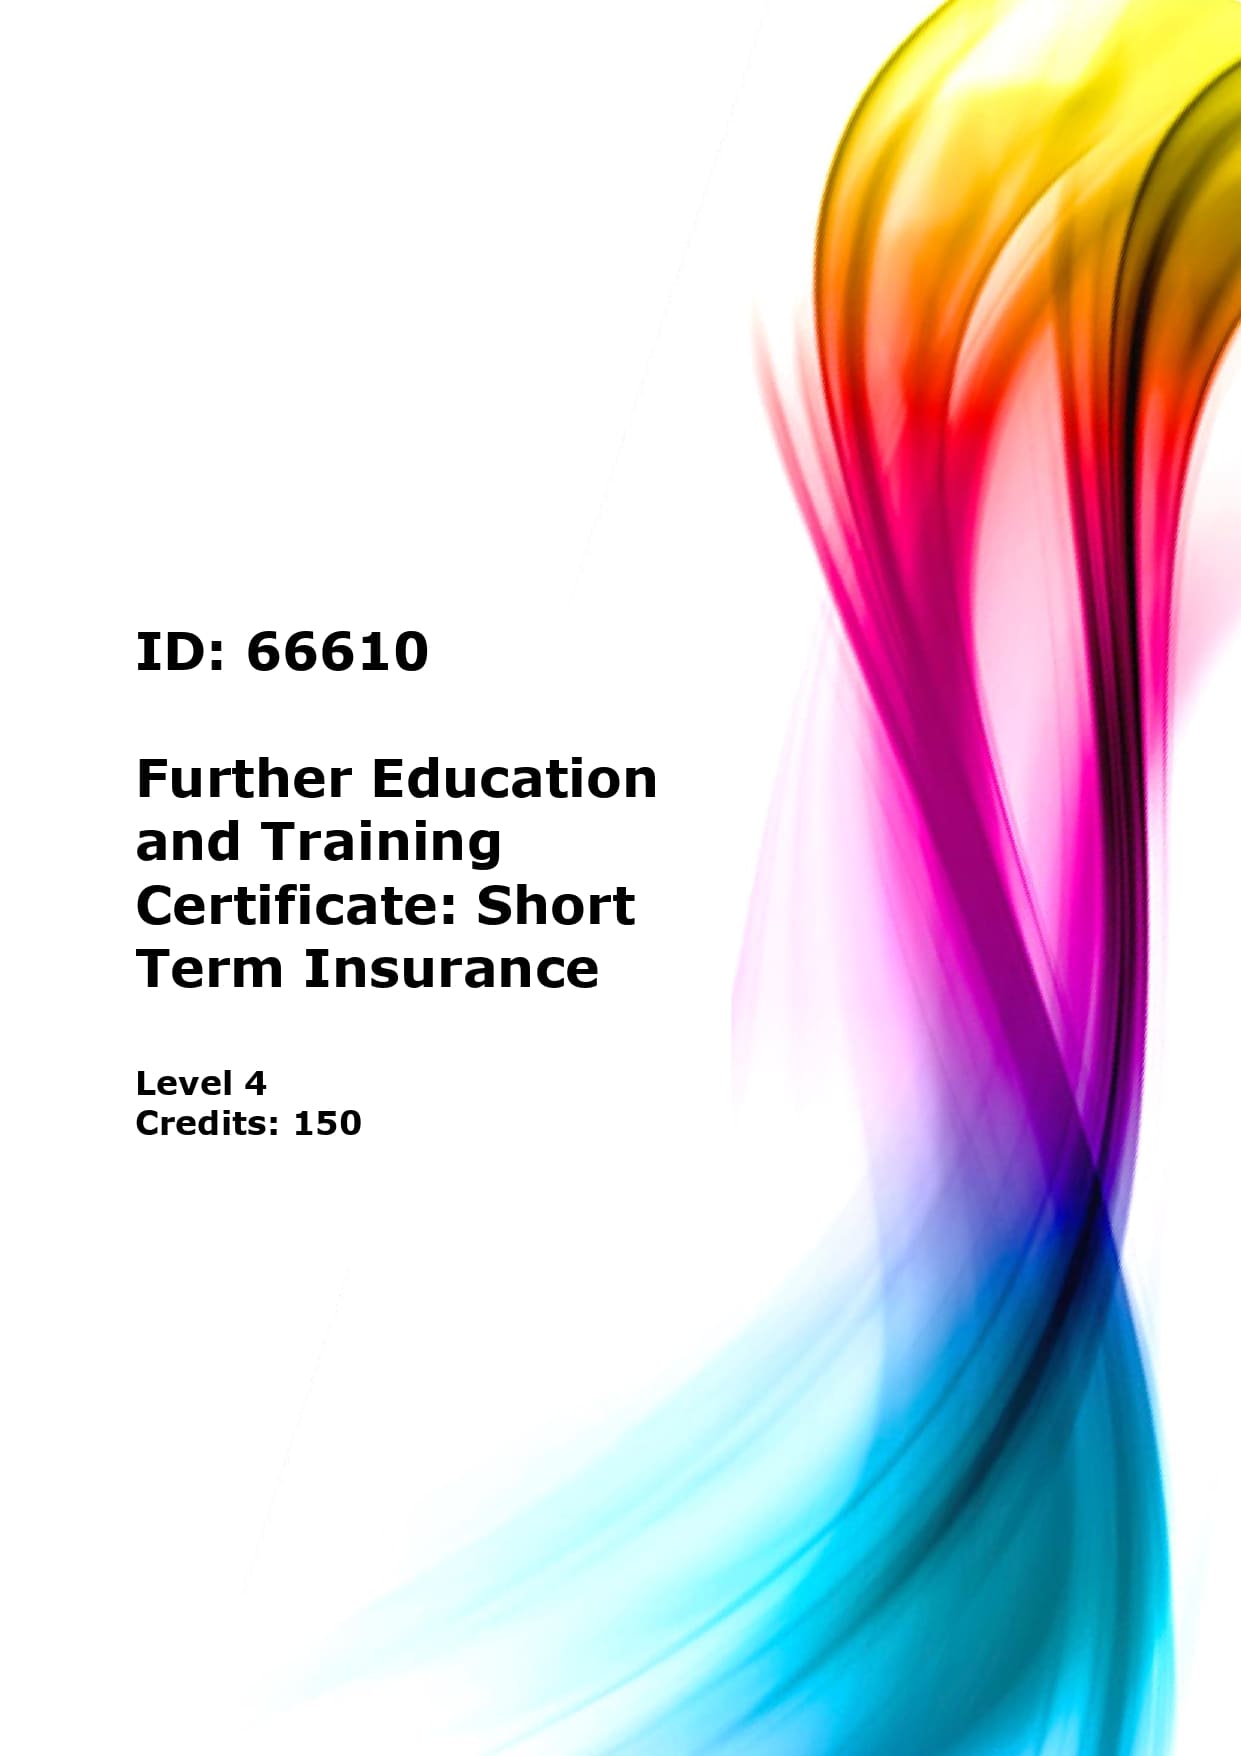 Further Education and Training Certificate: Short Term Insurance